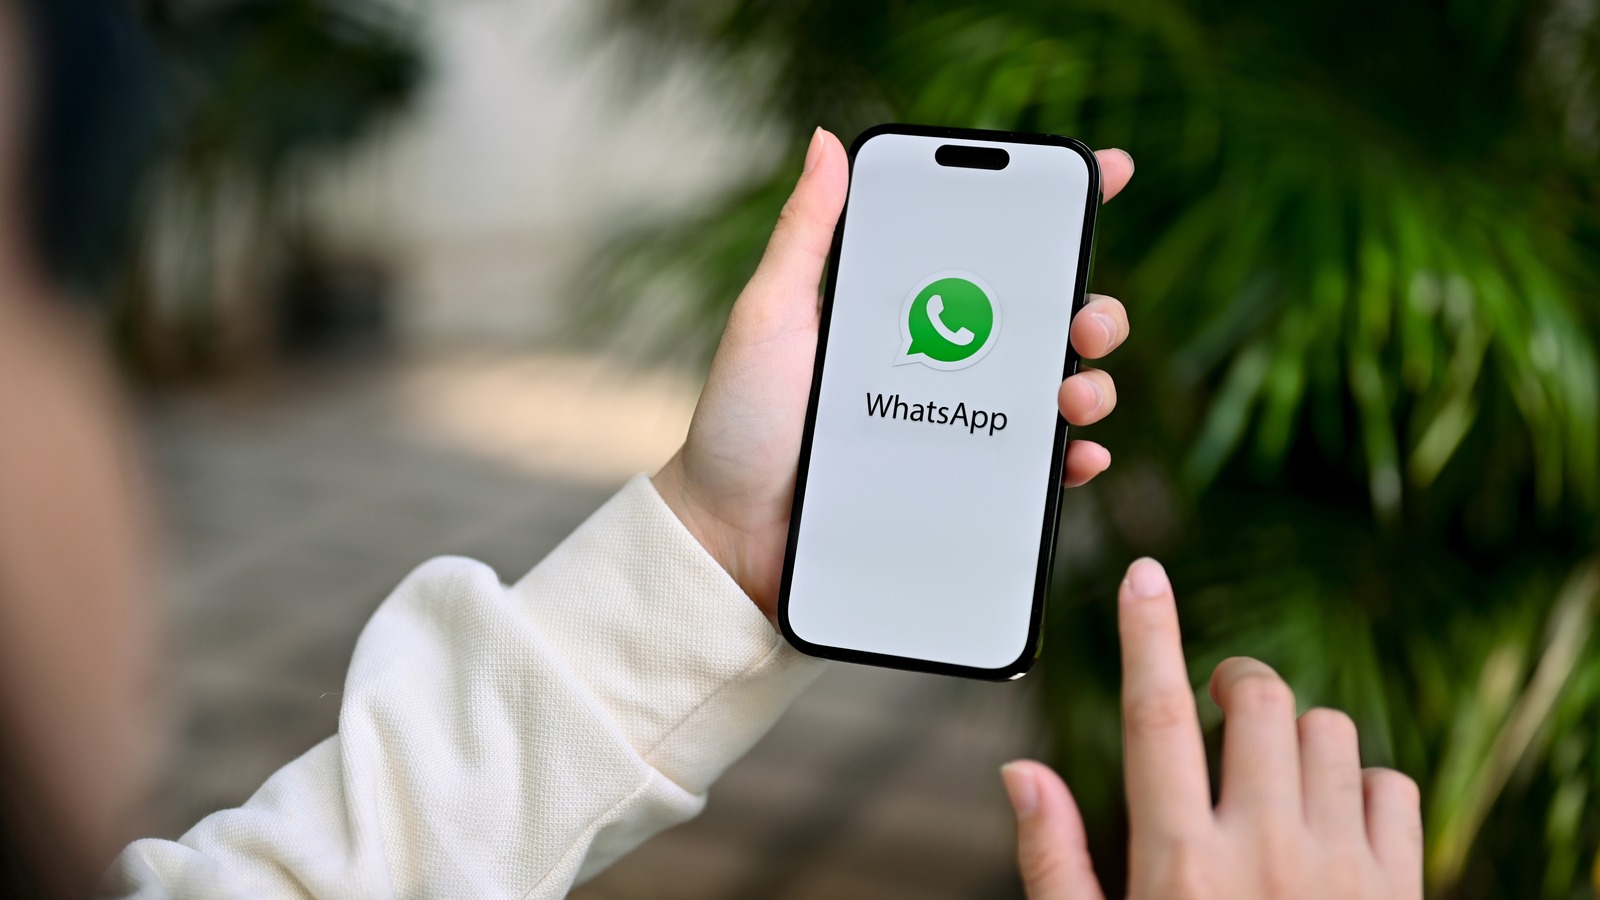 WhatsApp Explained: A Basic Guide To This Giant Messaging App – SlashGear